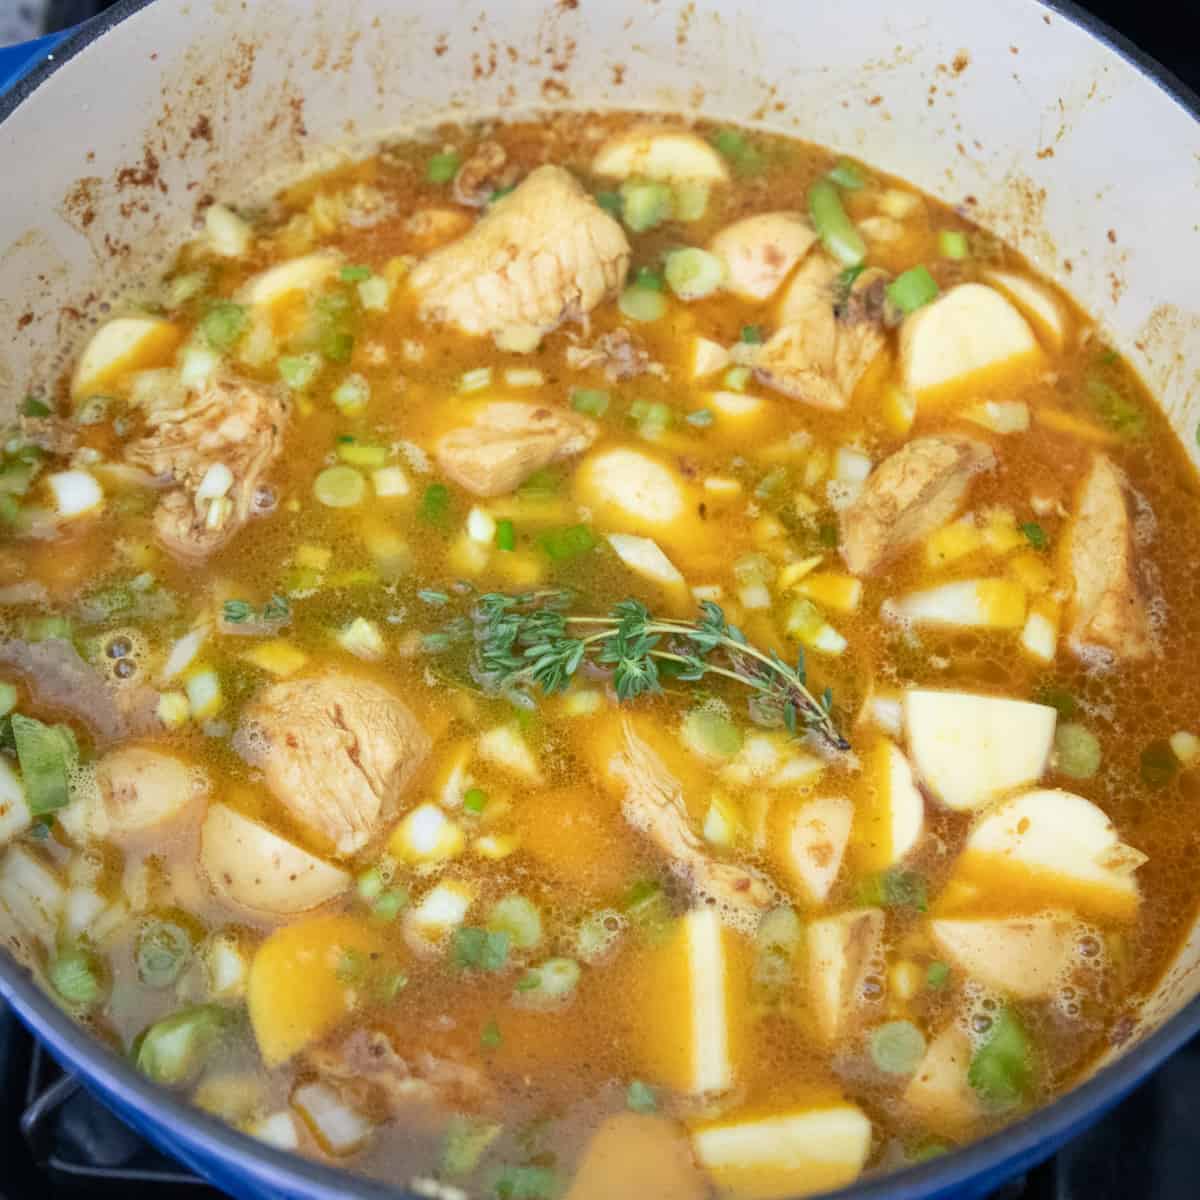 Curry chicken ingredients in a pot, including chicken, green onions, potatoes, and other vegetables.